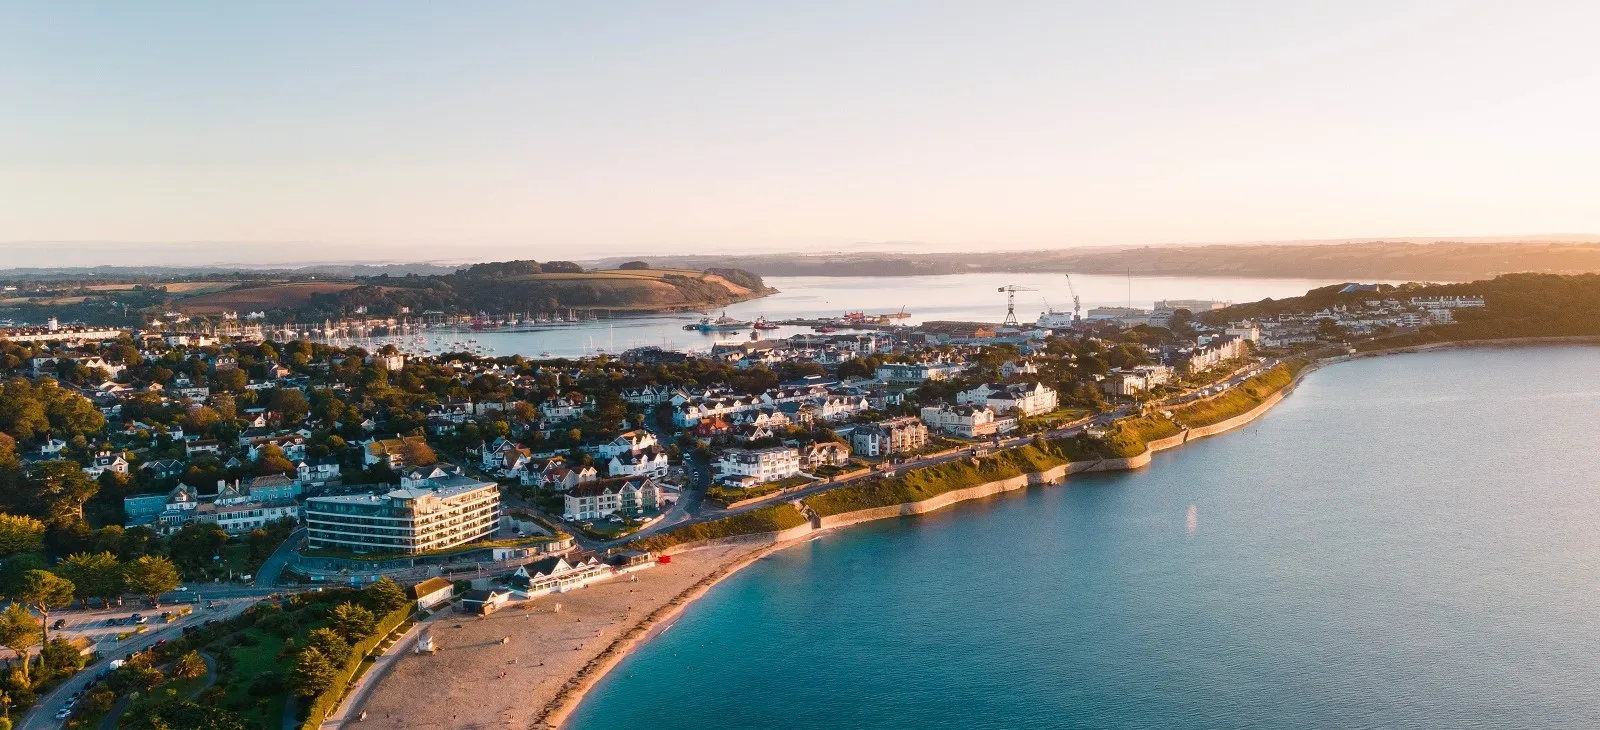 Aerial view of Falmouth looking out to sea.